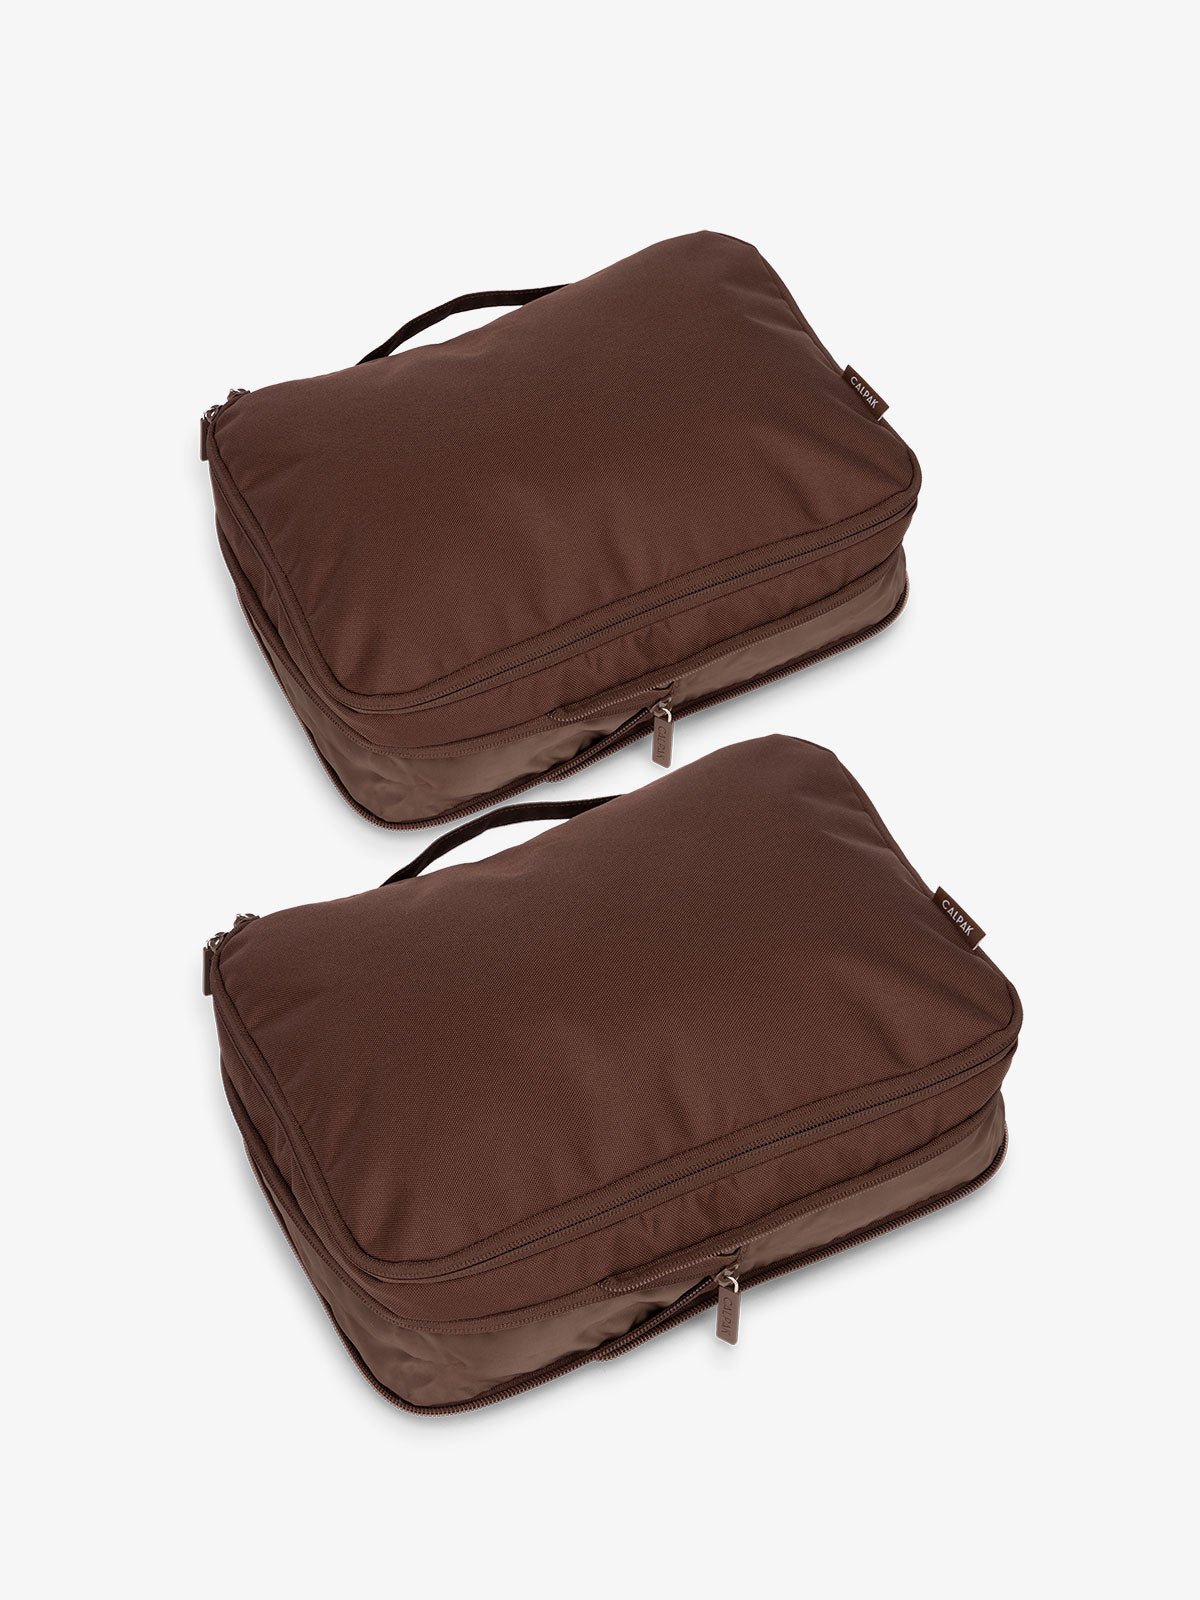 CALPAK compression packing cubes with top handles in dark brown walnut